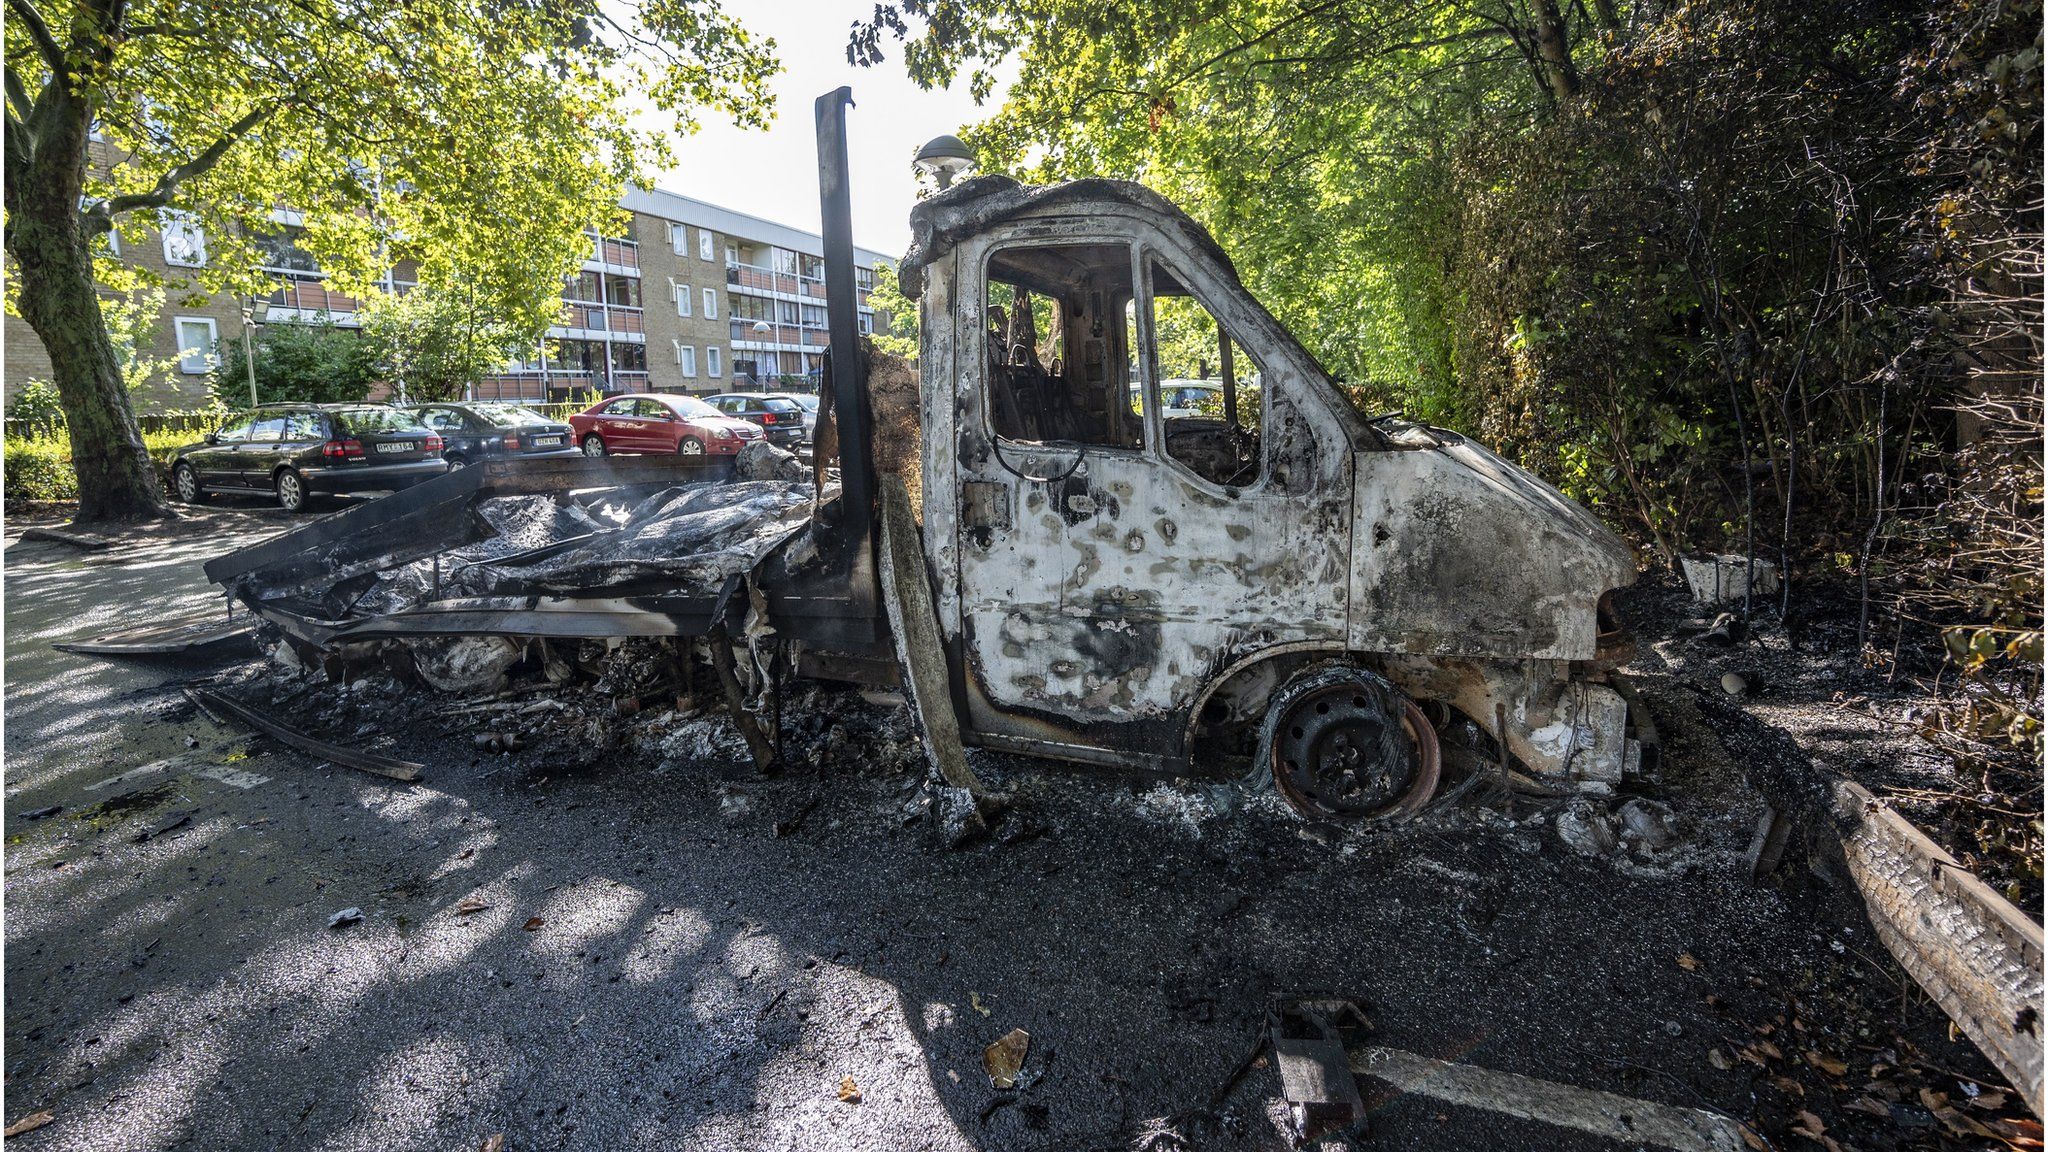 A burnt out light truck pictured a day after the riot in the Rosengard neighbourhood of Malmo, Sweden, 29 August 2020.